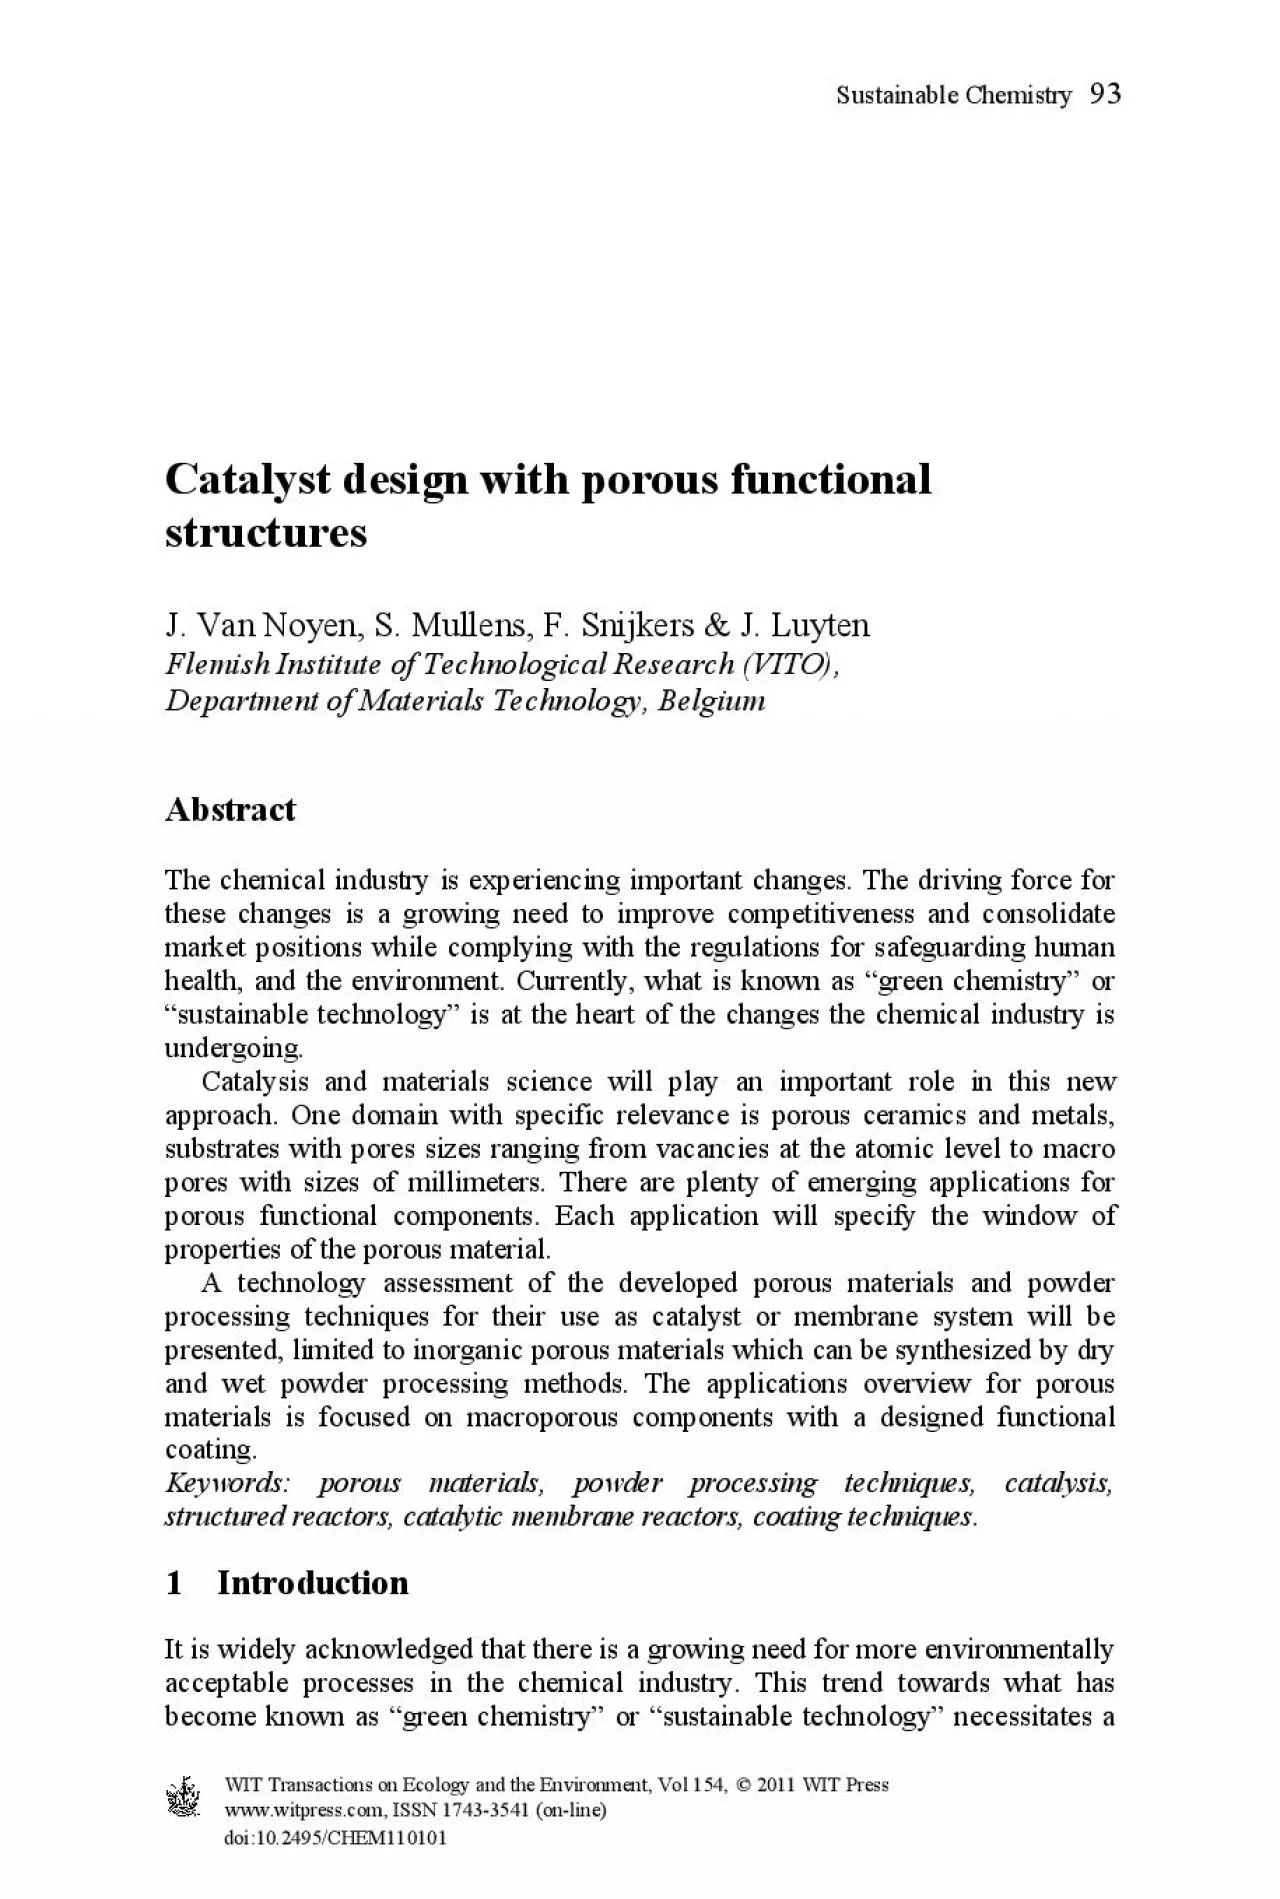 Catalyst design with porous functional